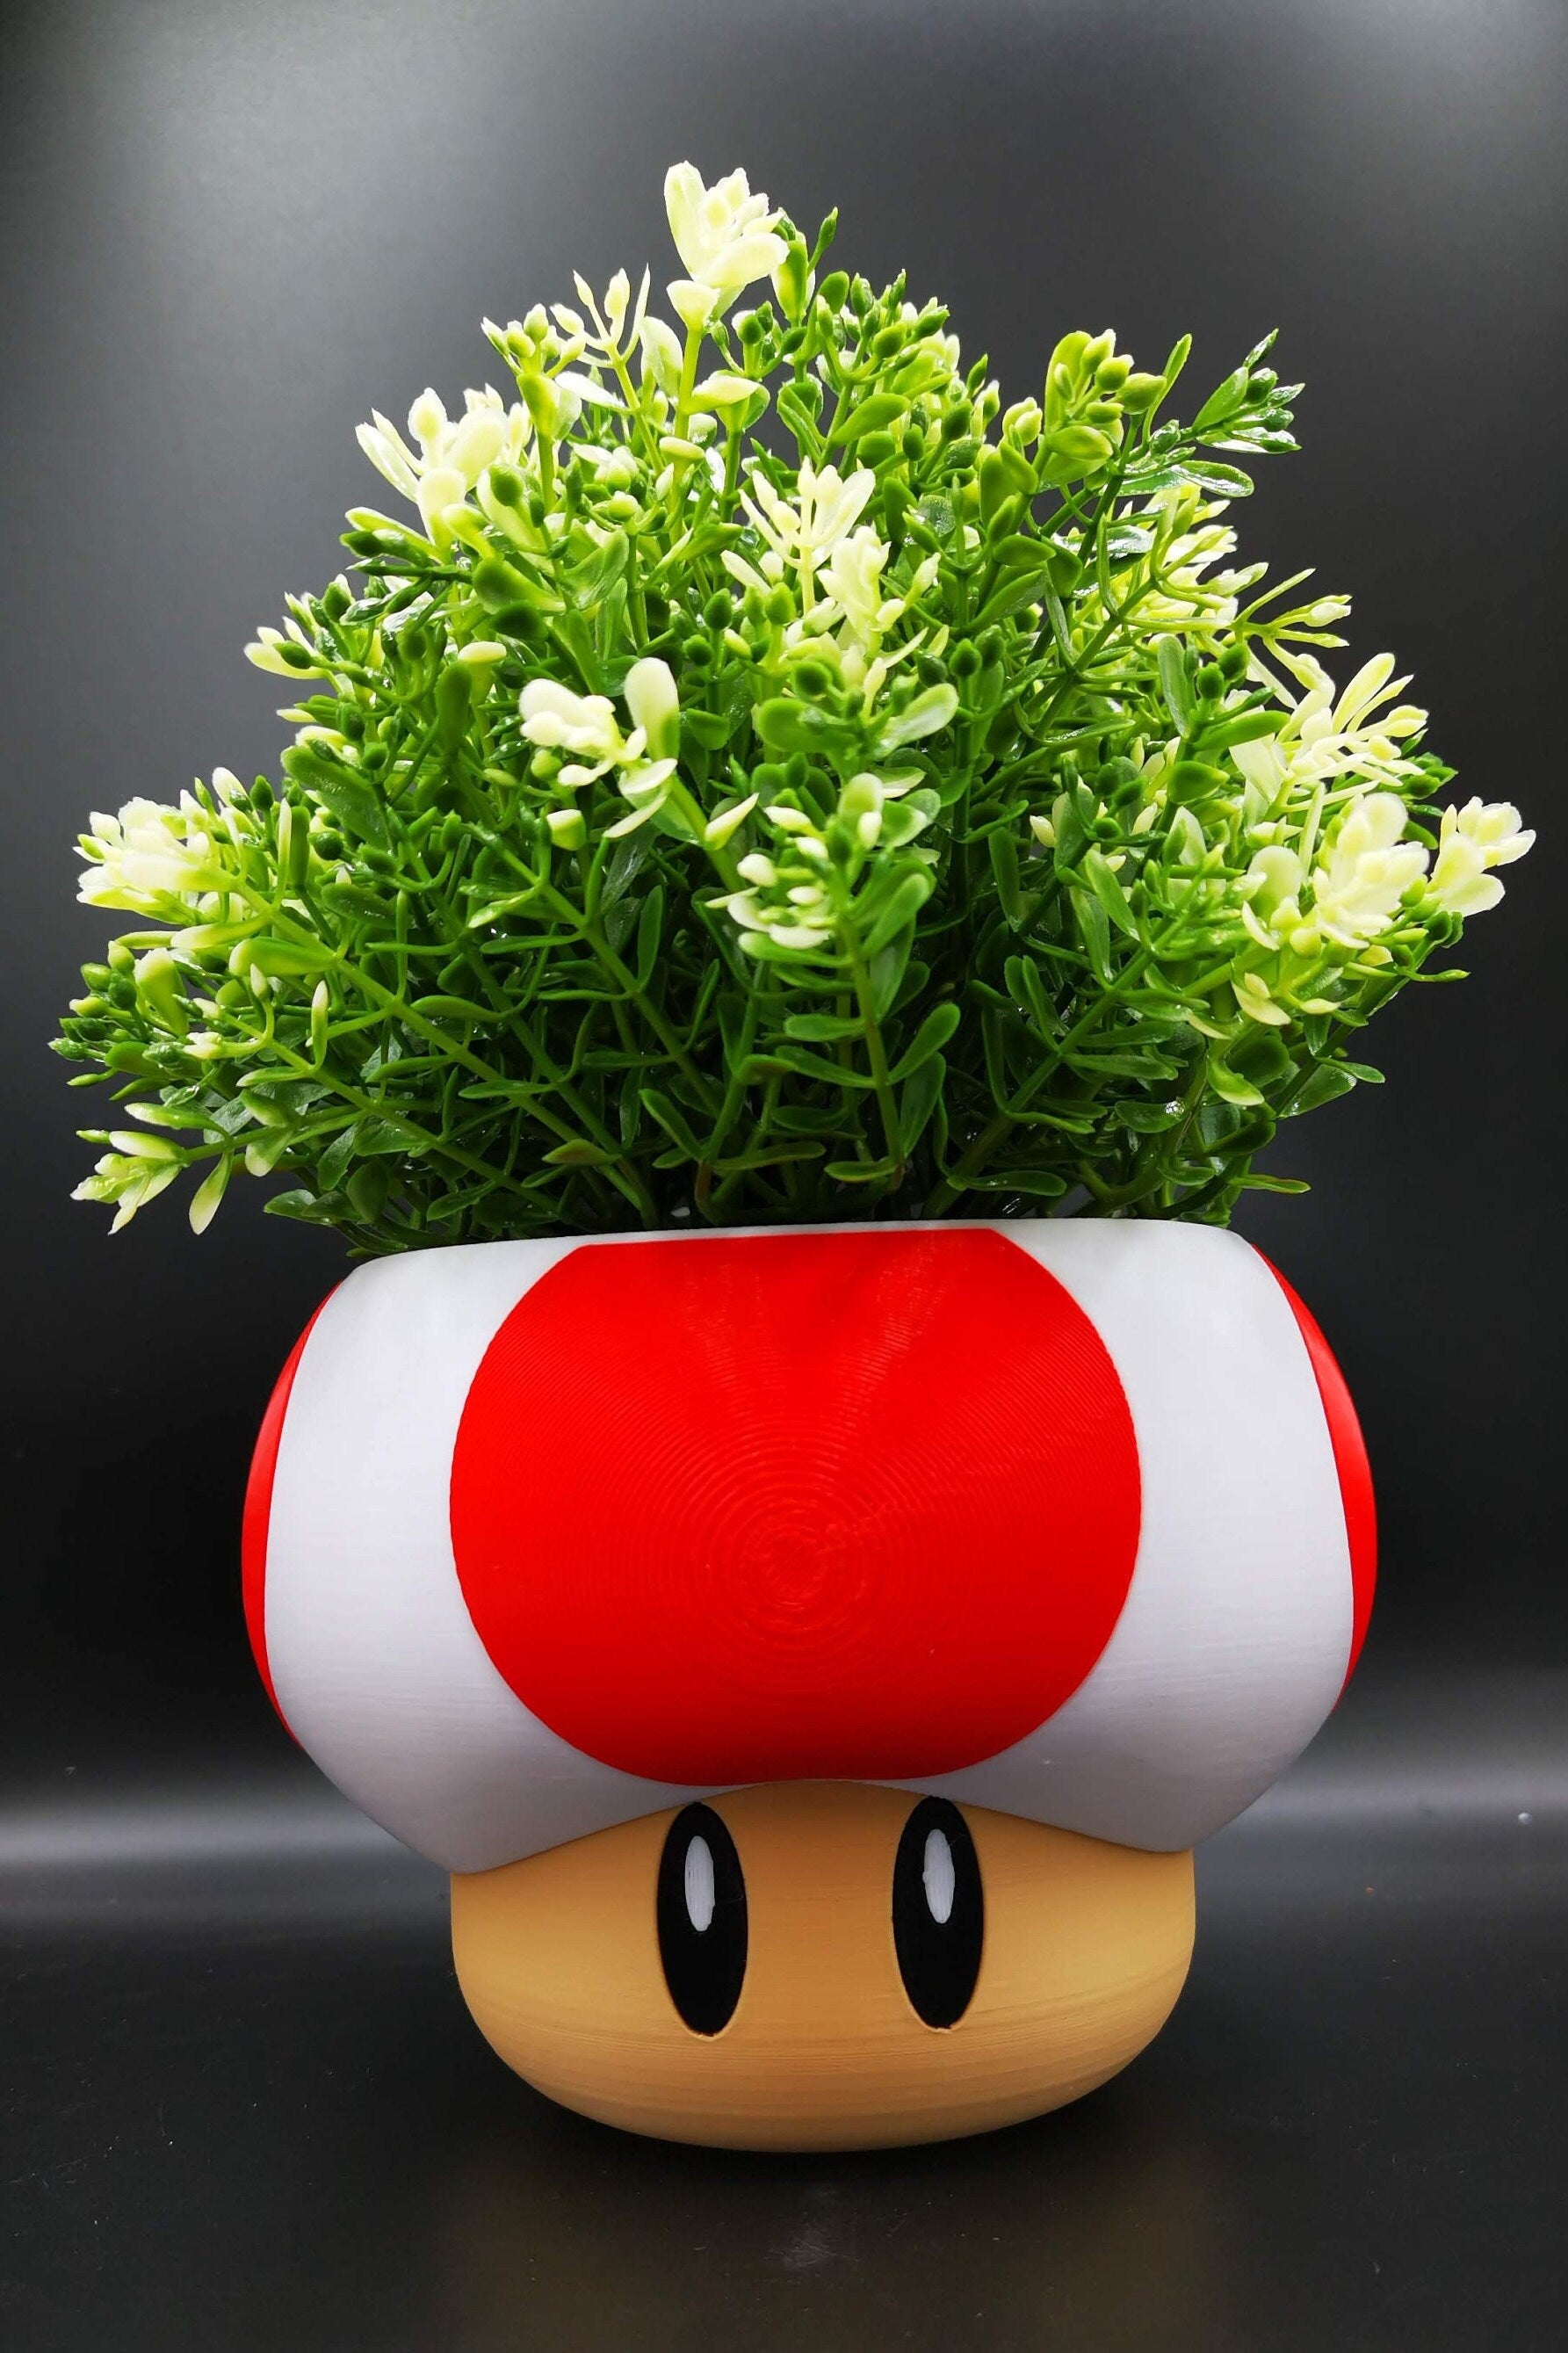 Mario mushroom planter - Various colours and sizes! / Super Mario Toadstool plant pot / Gaming room decor / housewarming gift for new home